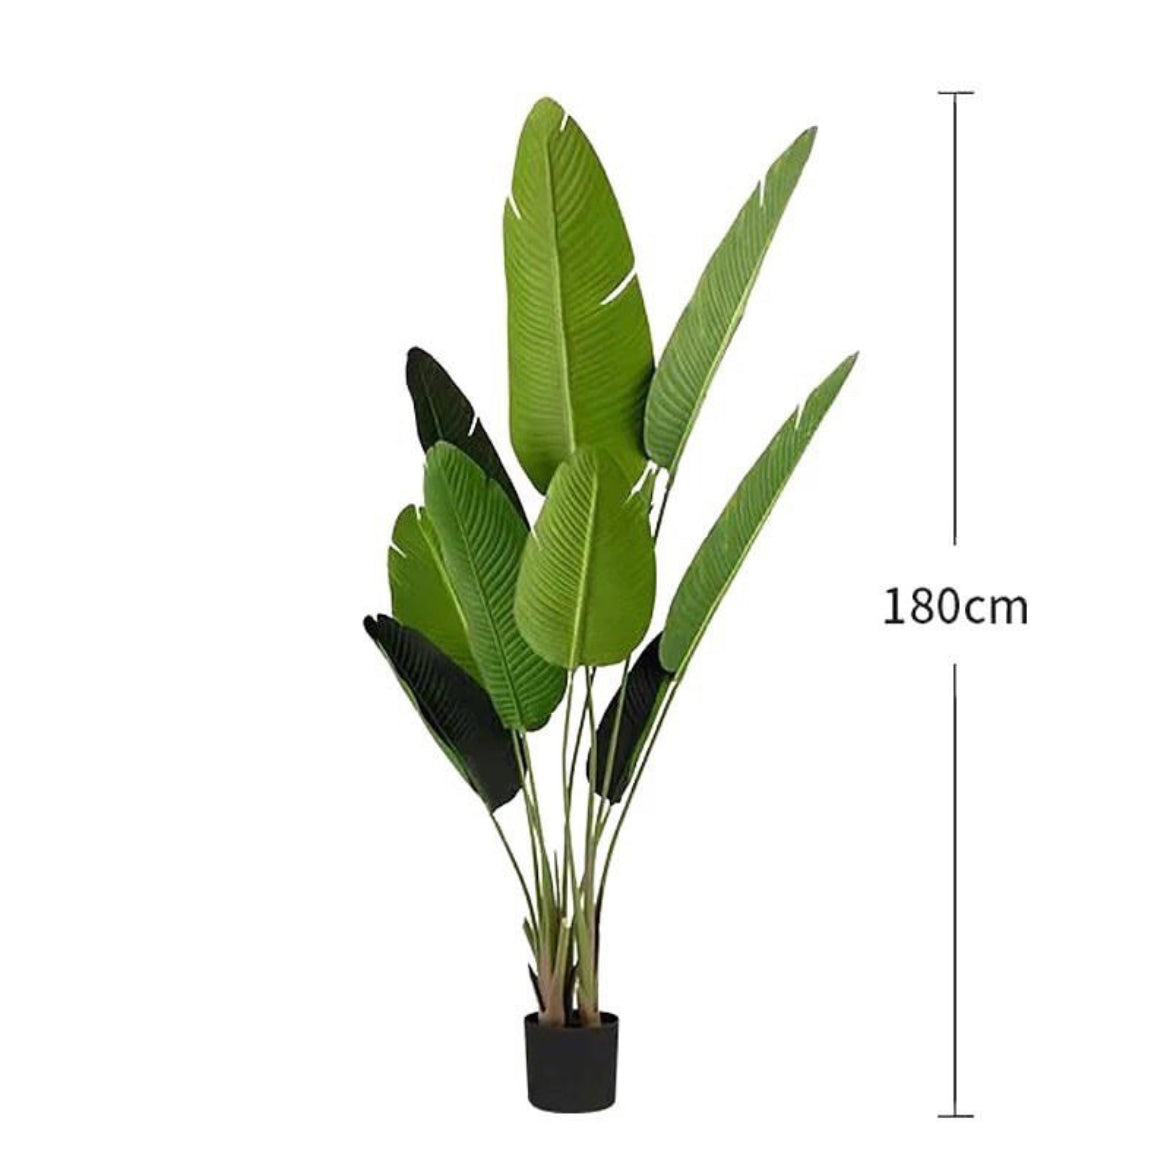 Artificial Banana Plant for Home Decoration and Office Decoration size 180 cm